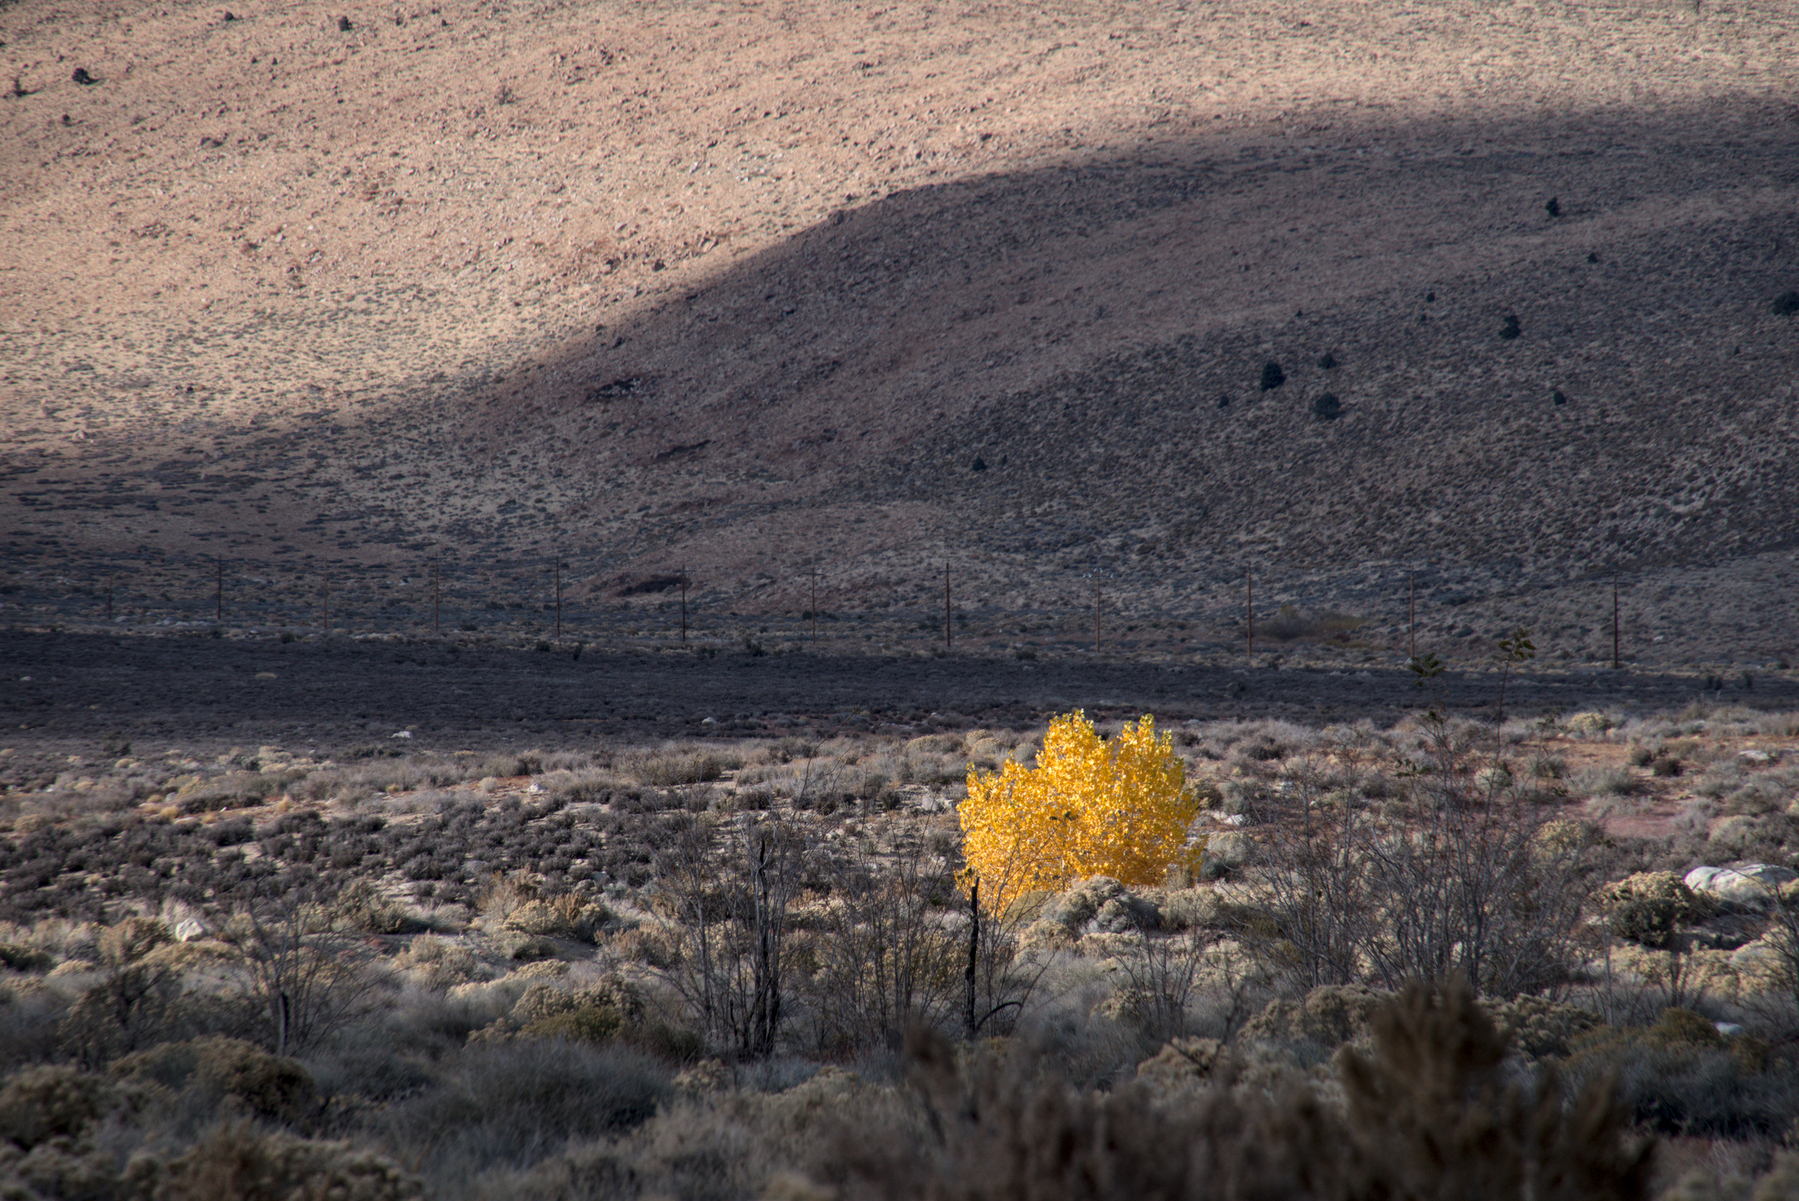 In a large bowl of high desert scrub, one tree stands, covered in bright yellow leaves.